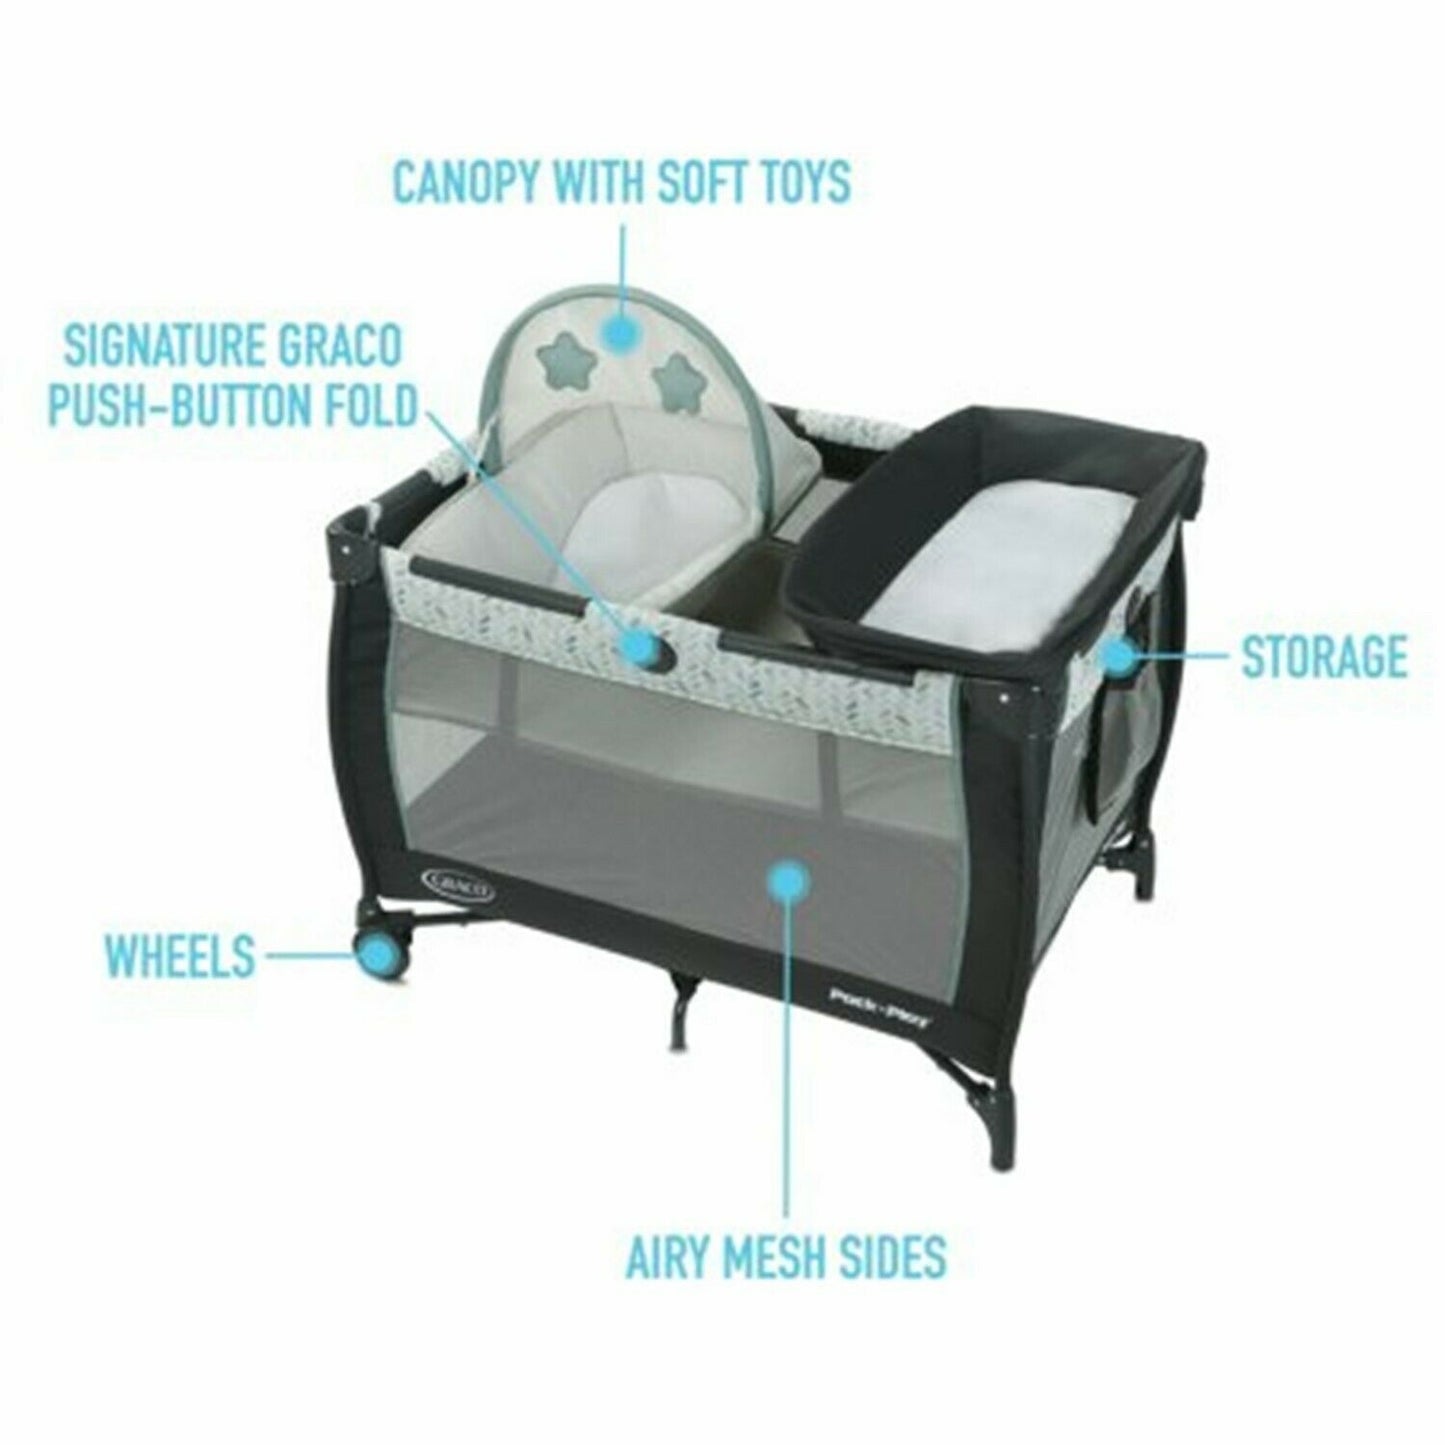 Baby Stroller with Car Seat Travel System Diaper Bag Playard Swing Combo